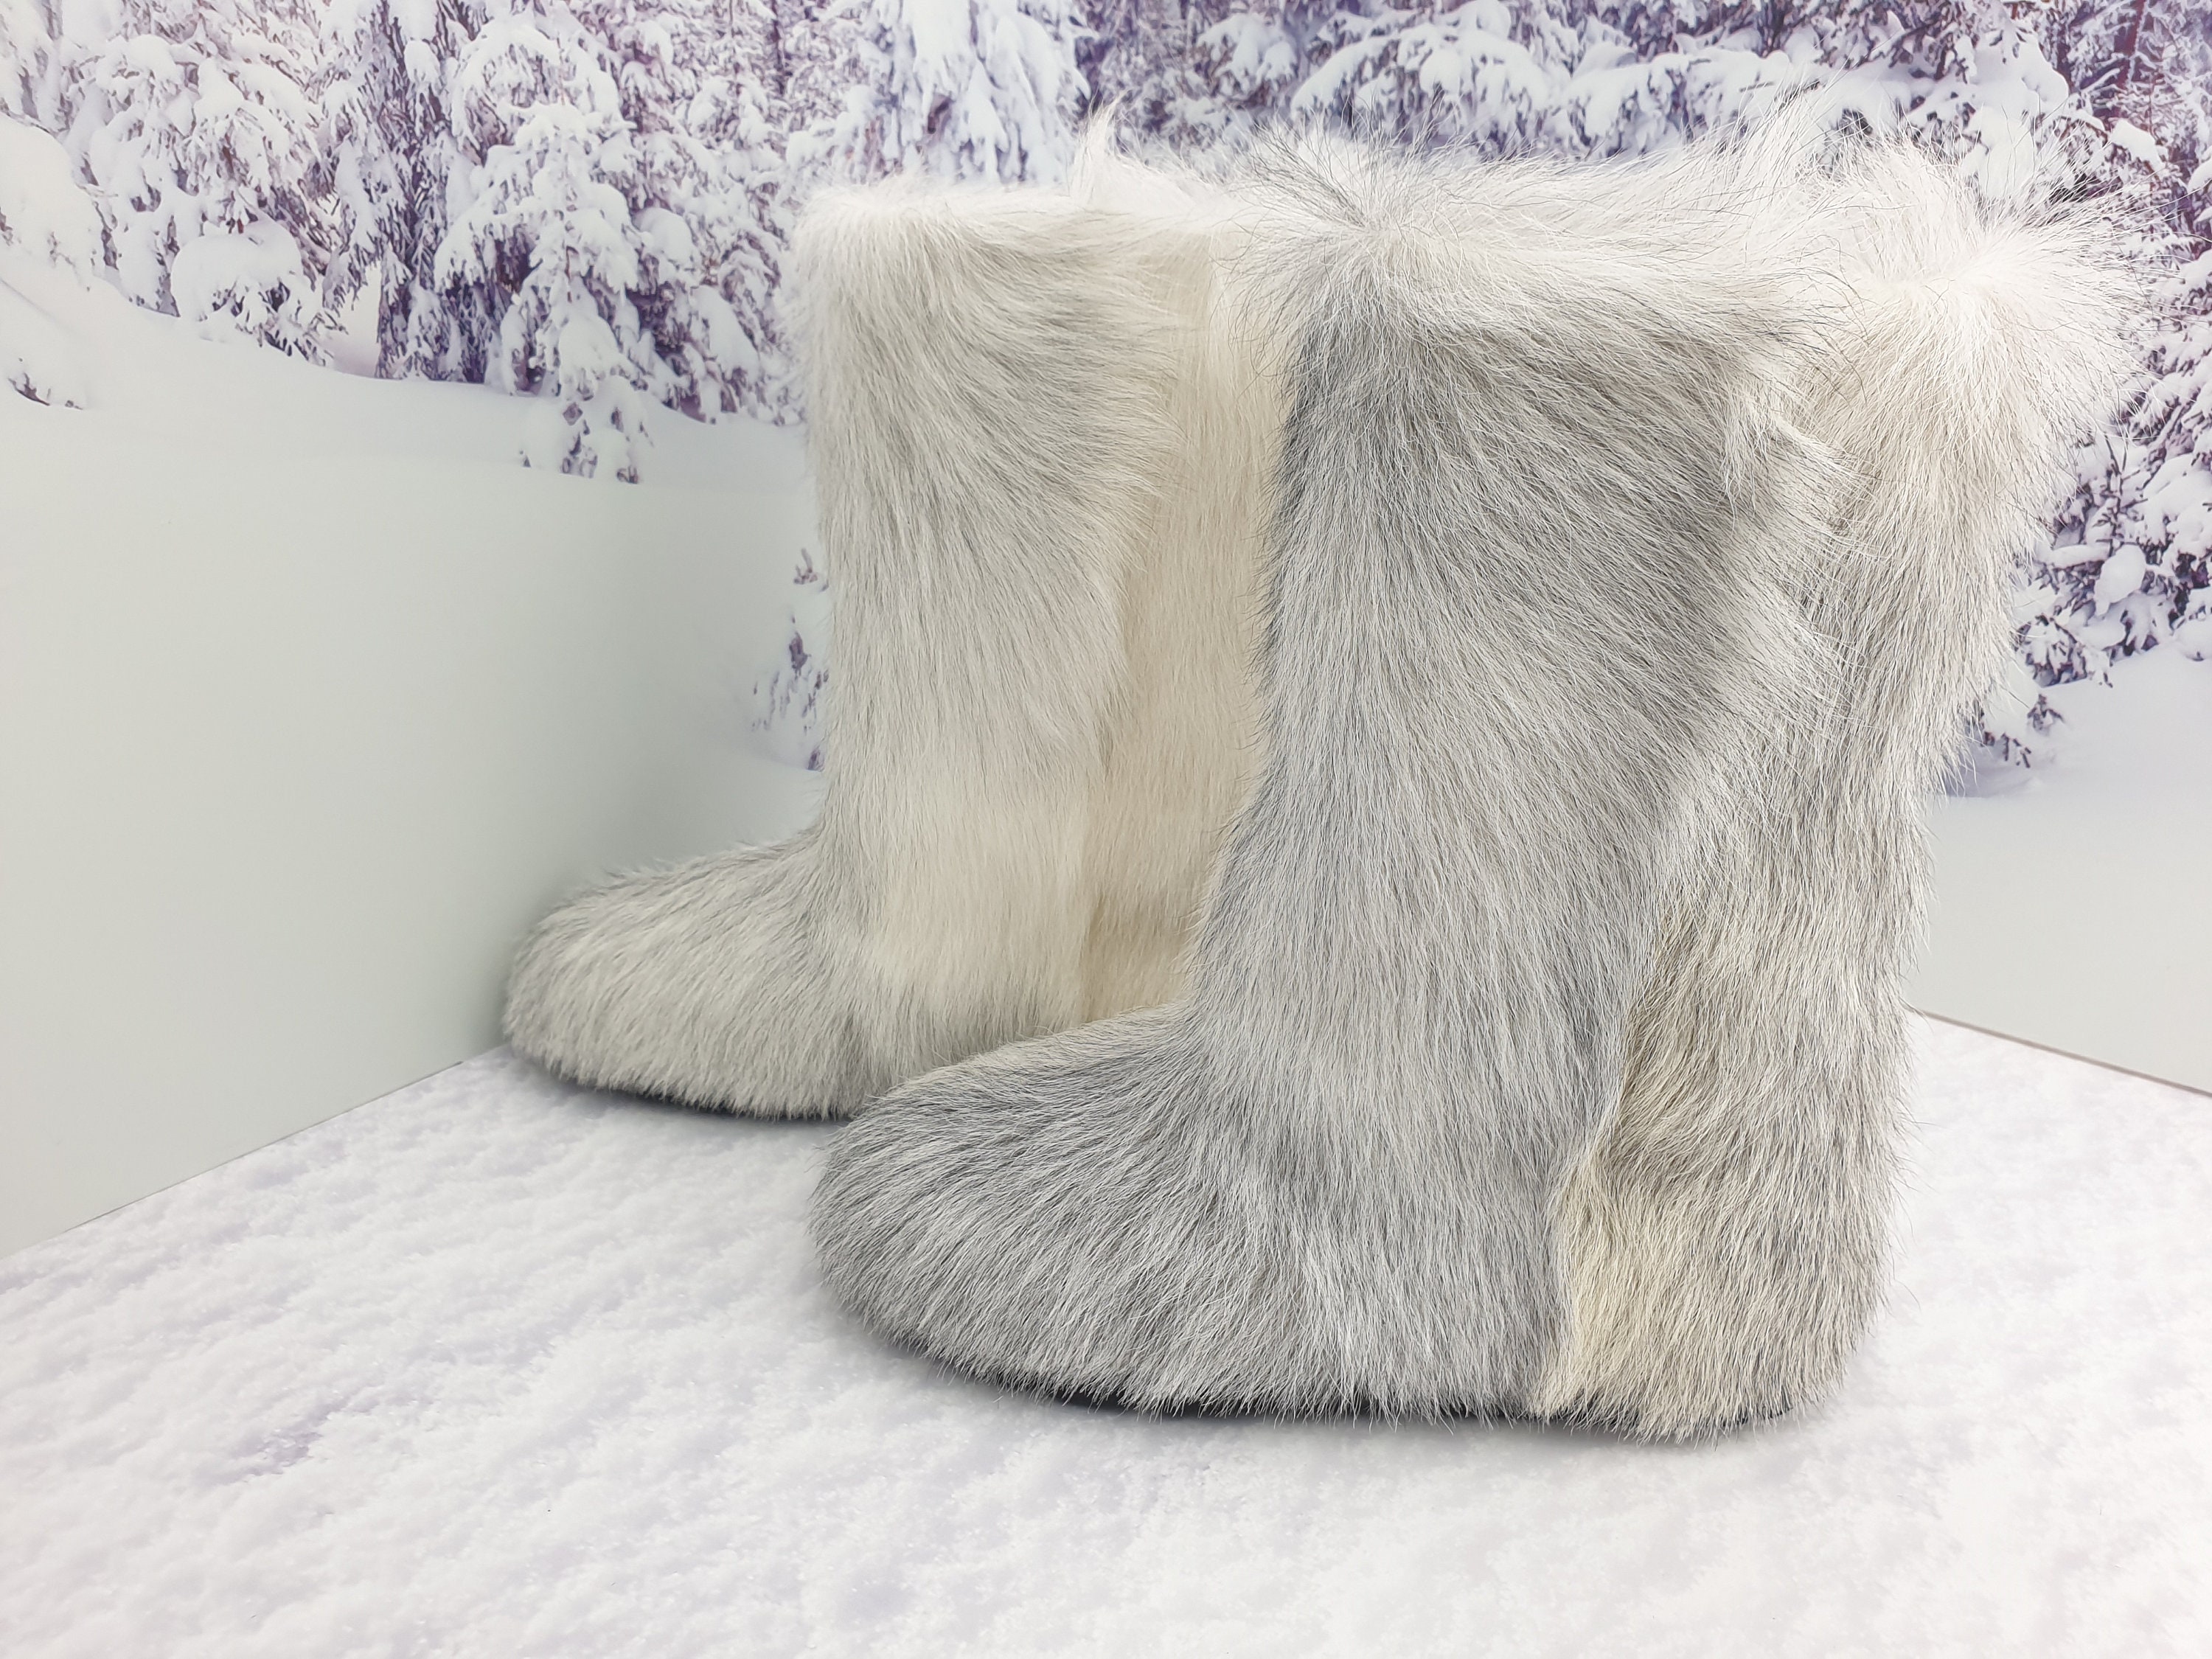 Gray fur boots for women Eskimo boots snow furry mukluks | Etsy